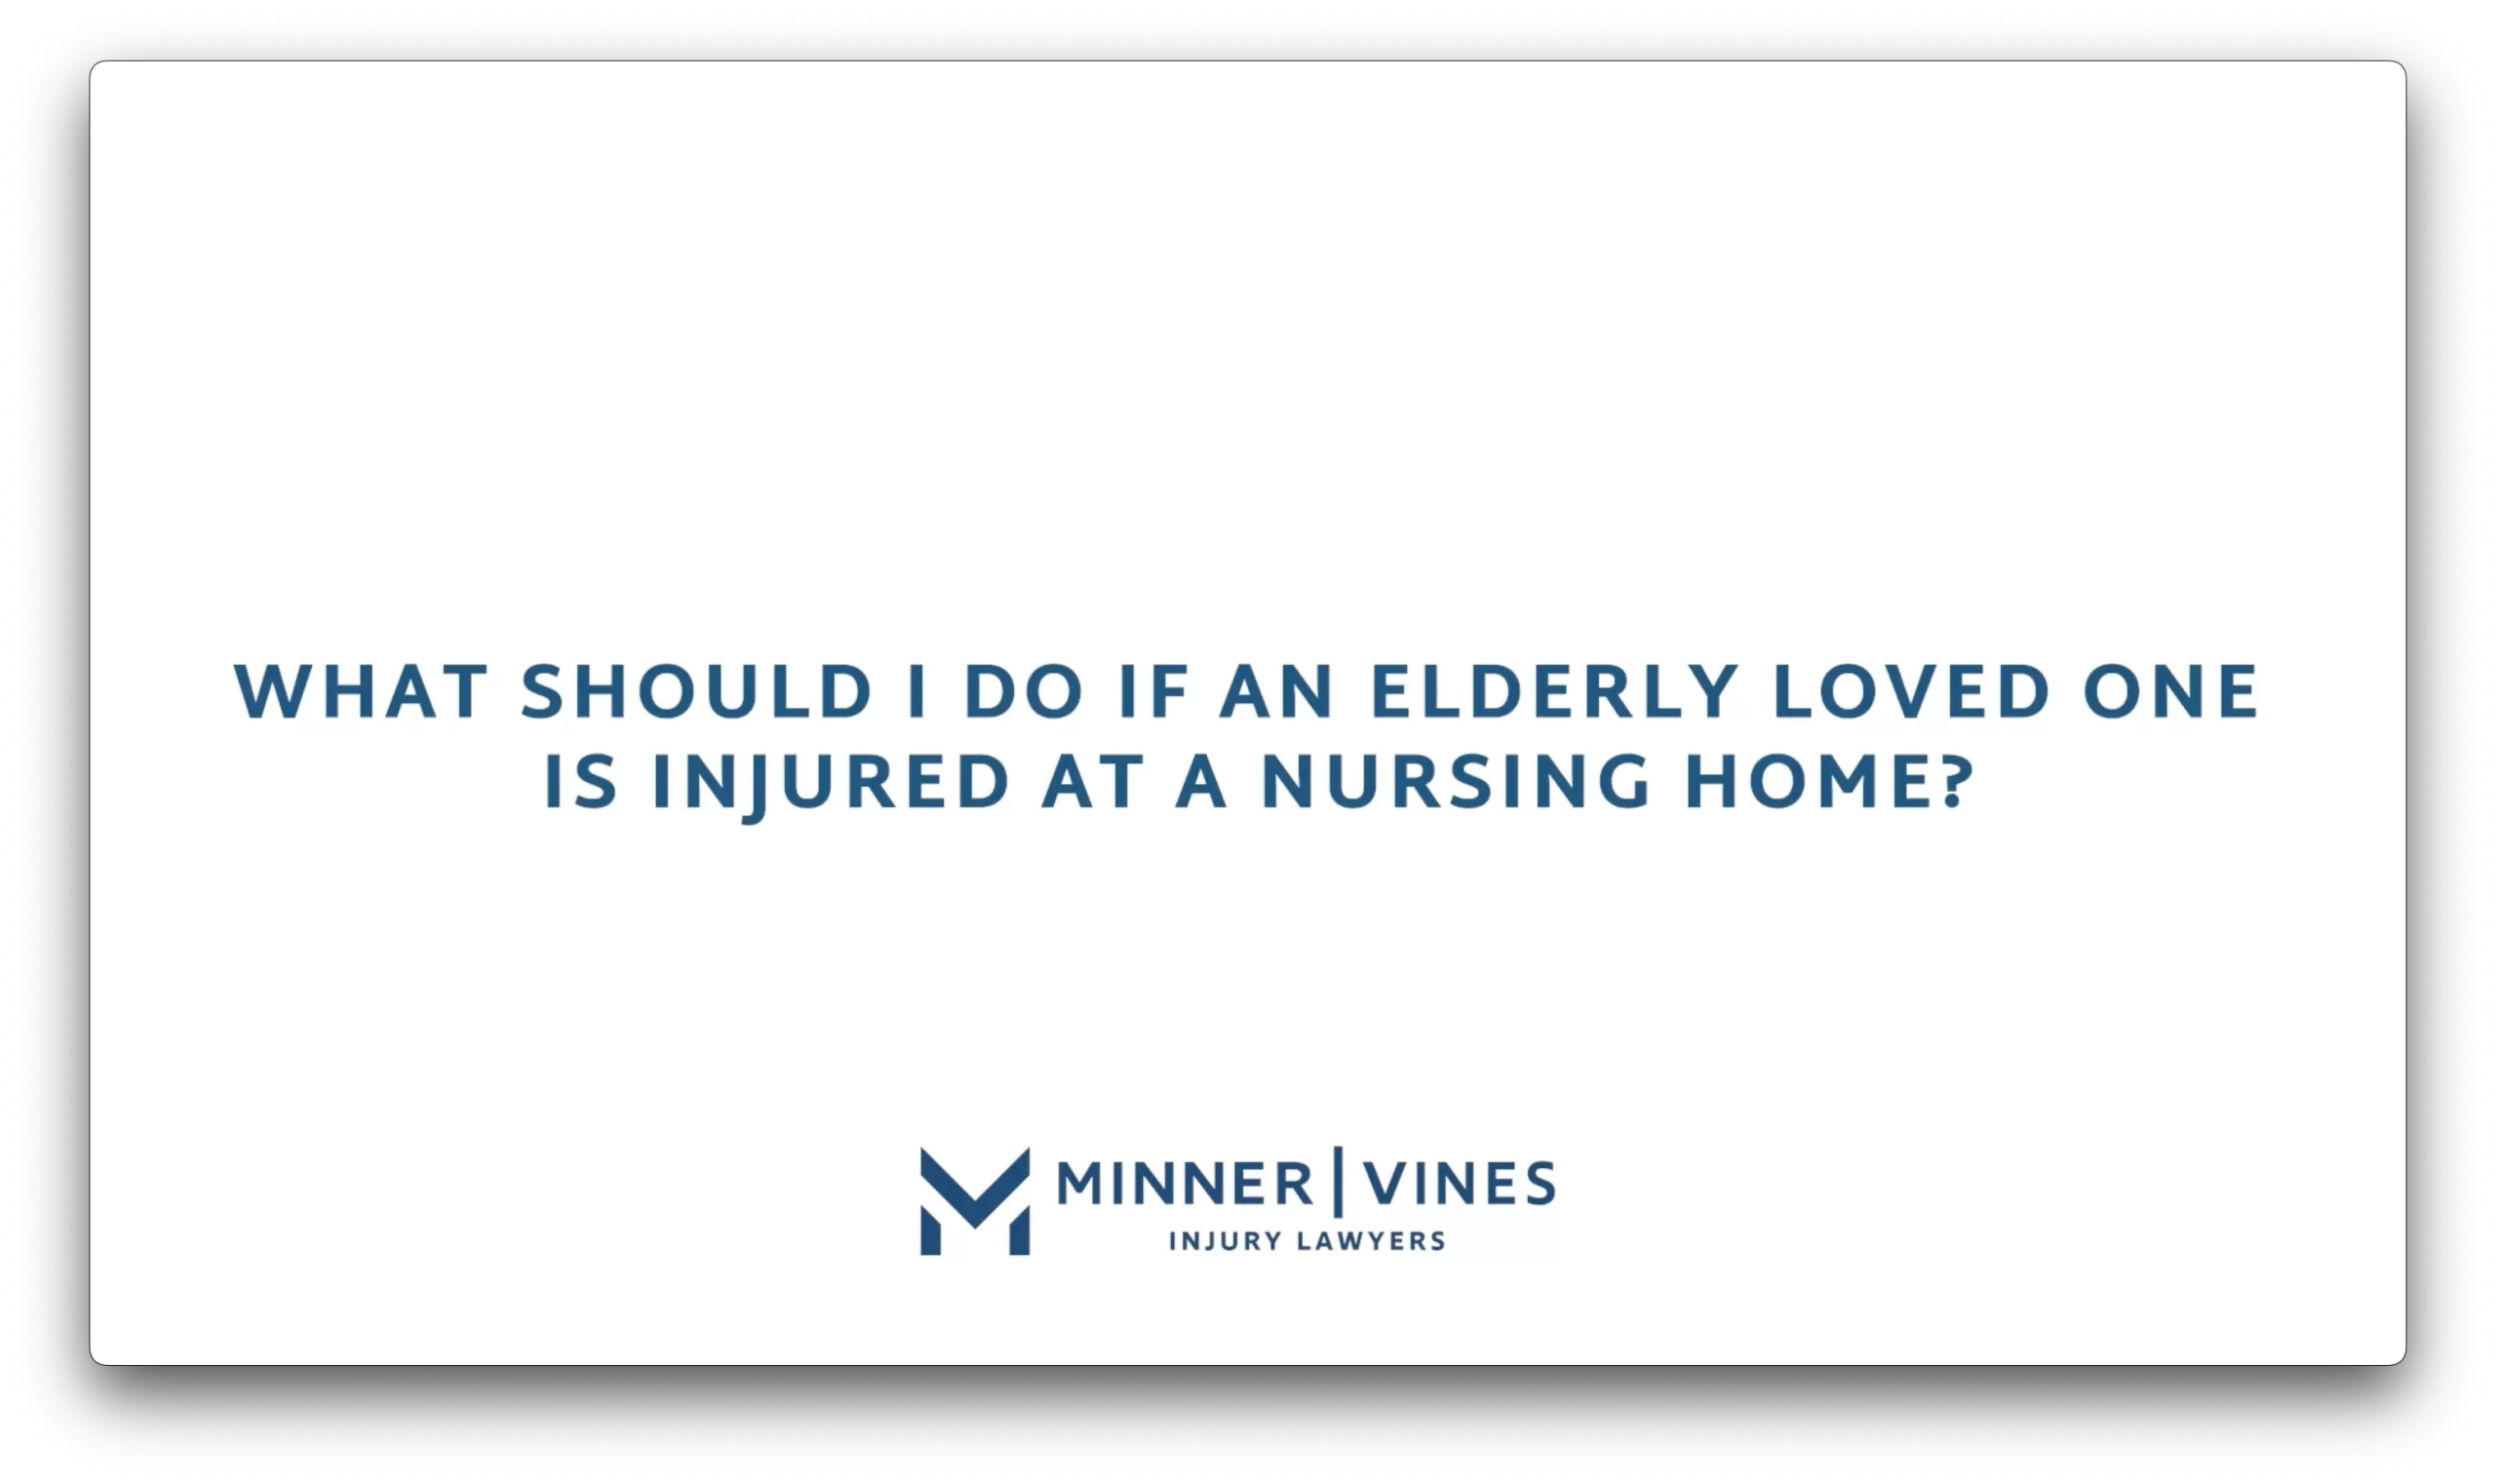 What should I do if an elderly loved one is injured at a nursing home?